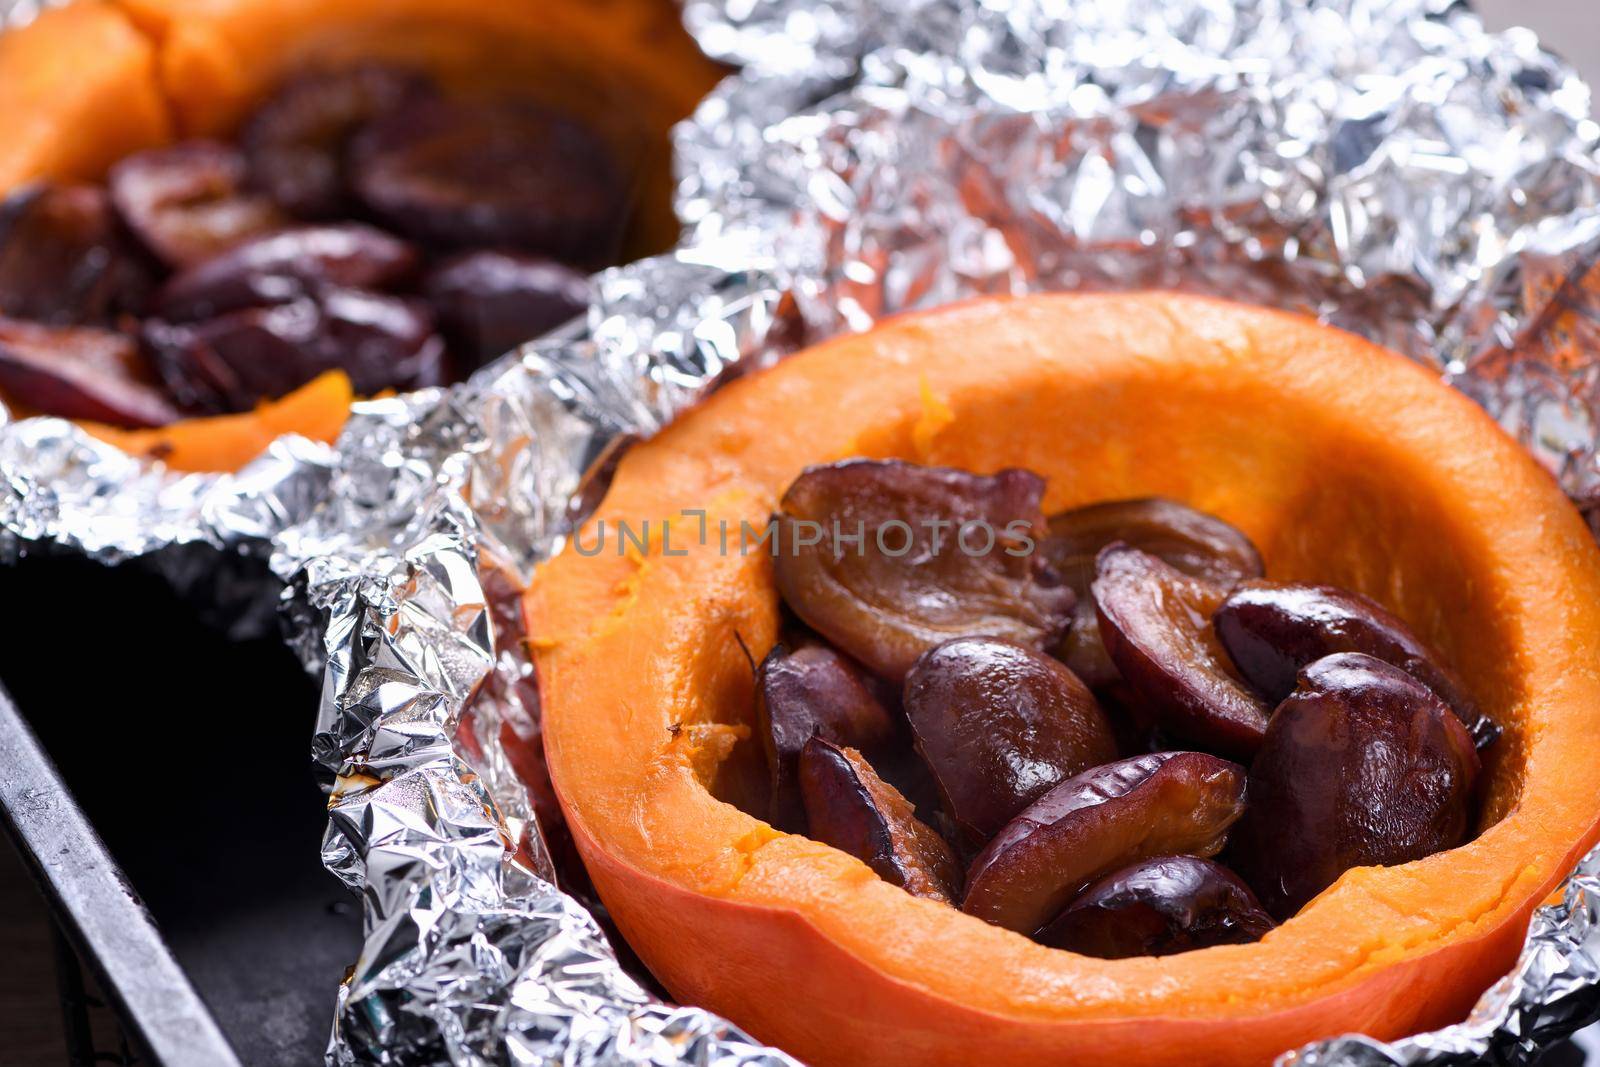  Stuffed baked pumpkin with plums by Apolonia